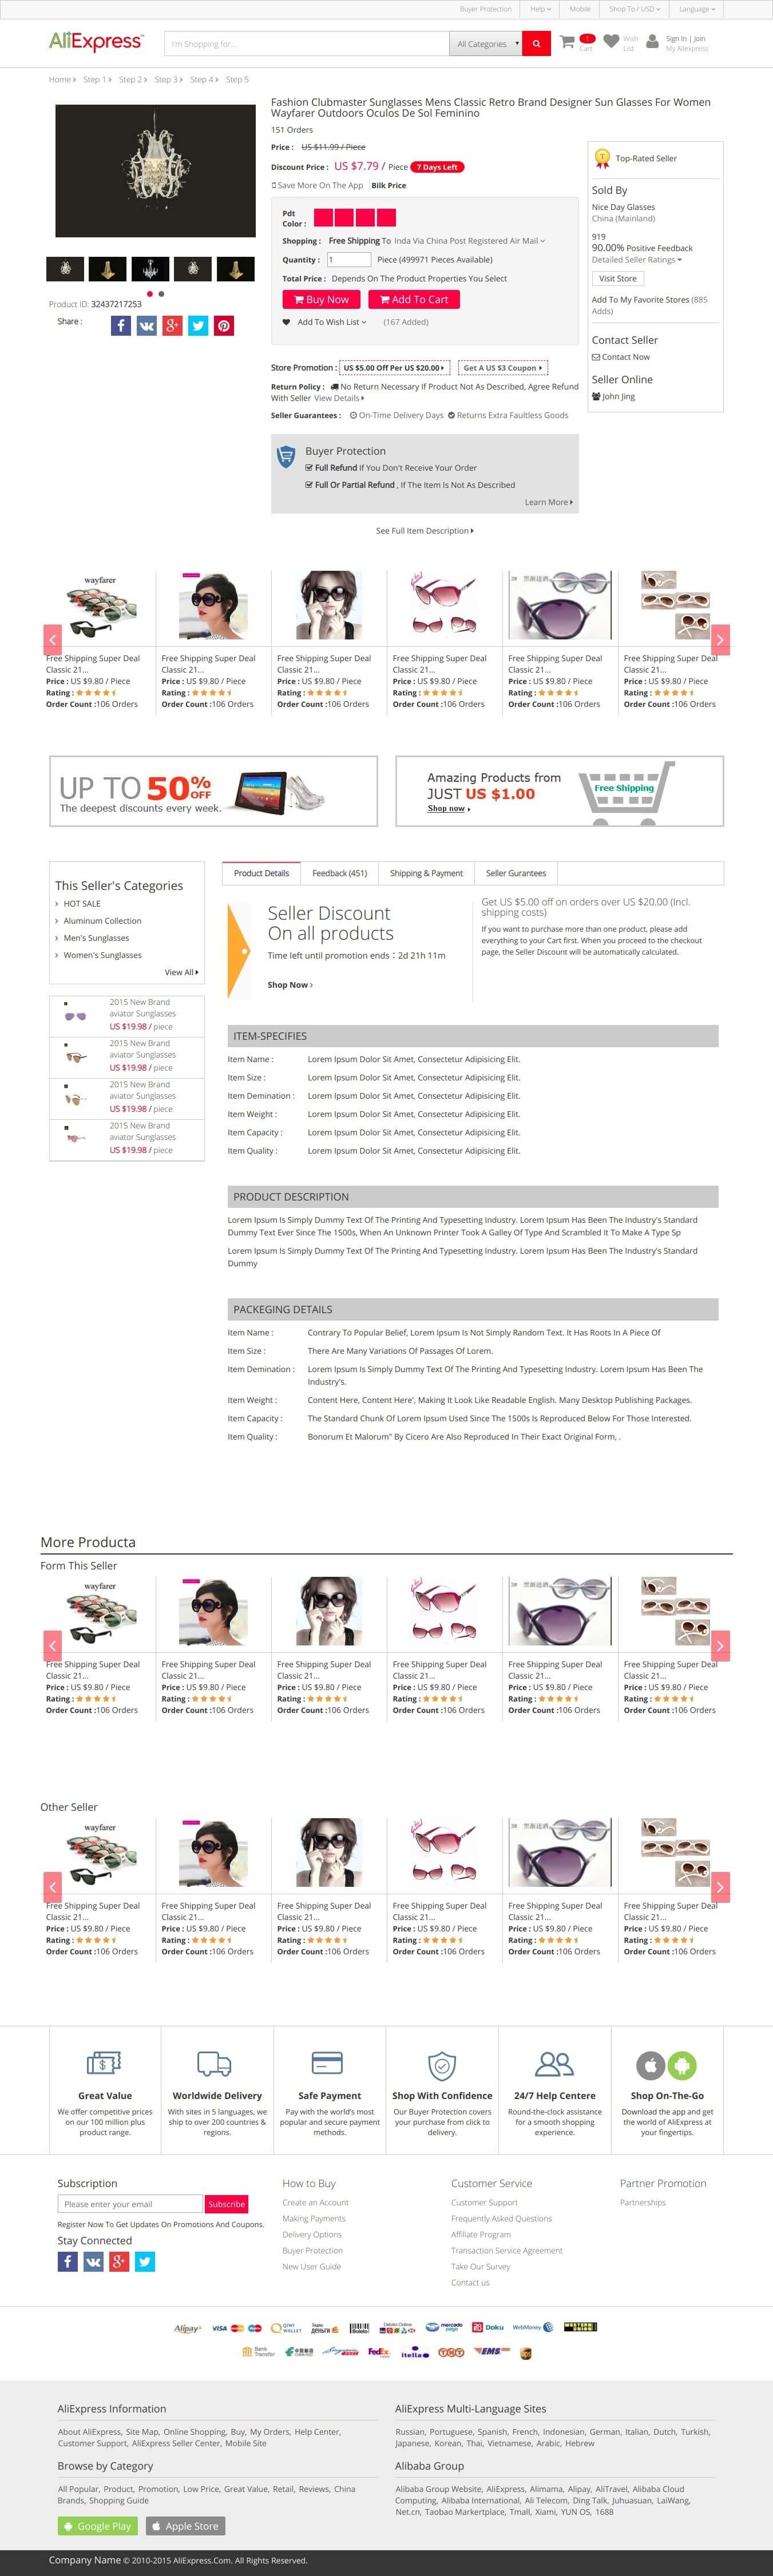 Product page Design - View image in New Tab for large experience